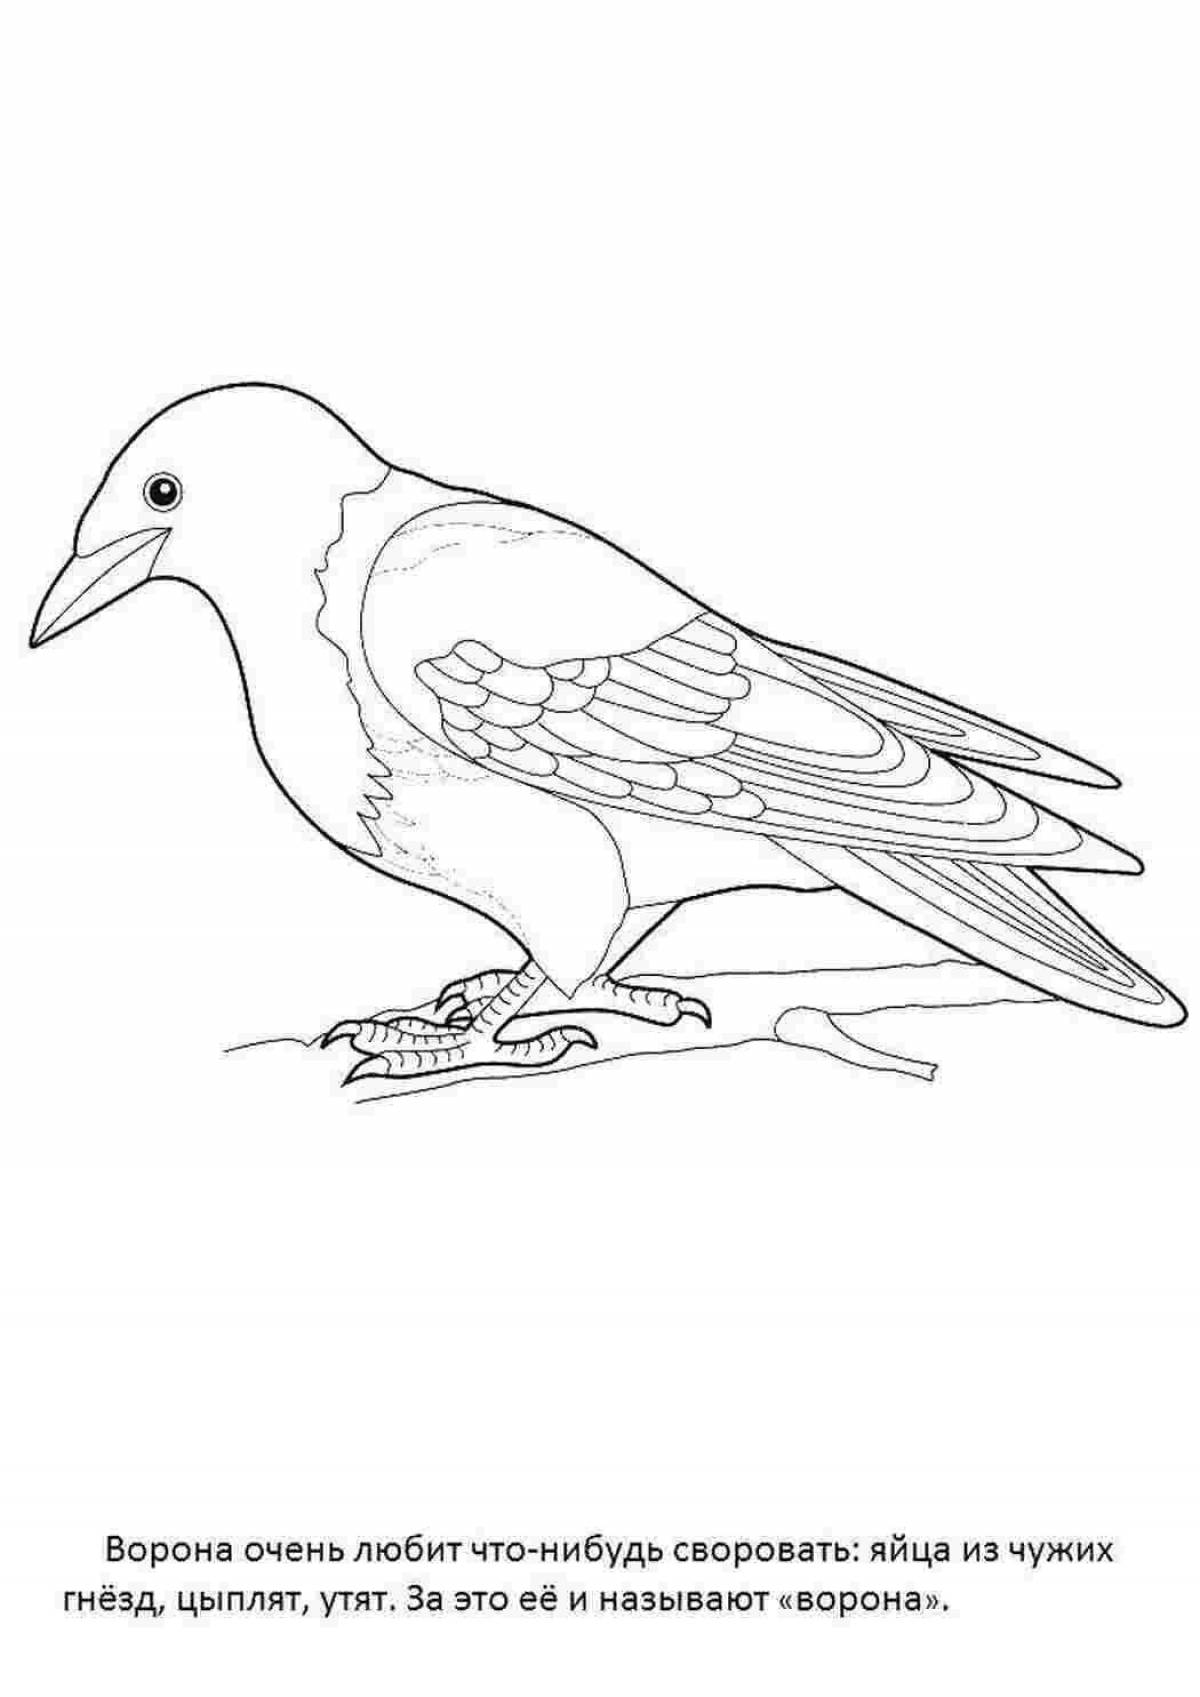 Funny jackdaw coloring for kids